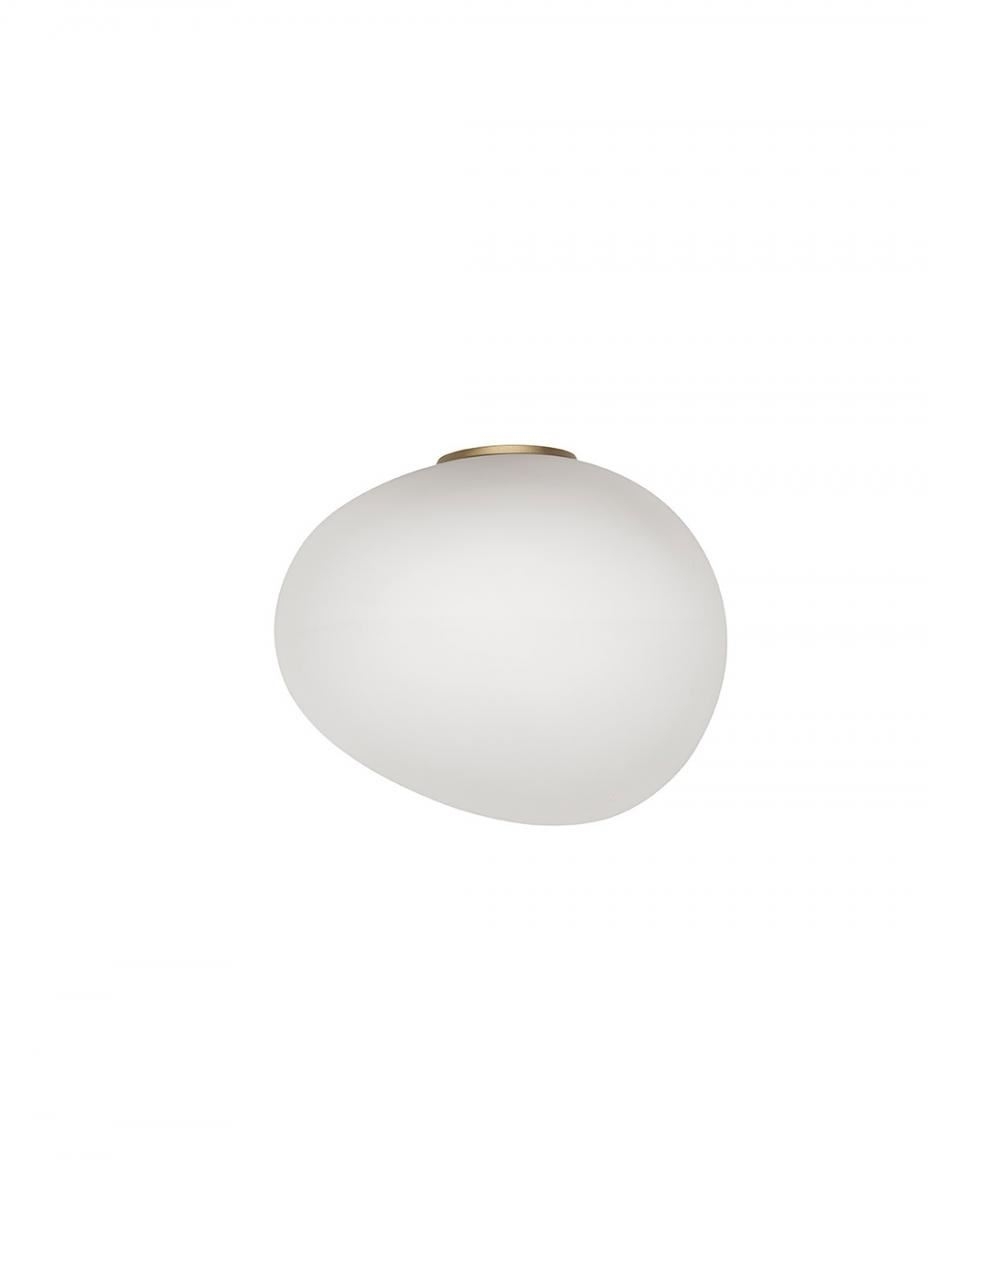 Gregg Wall Ceiling Light Small Gold